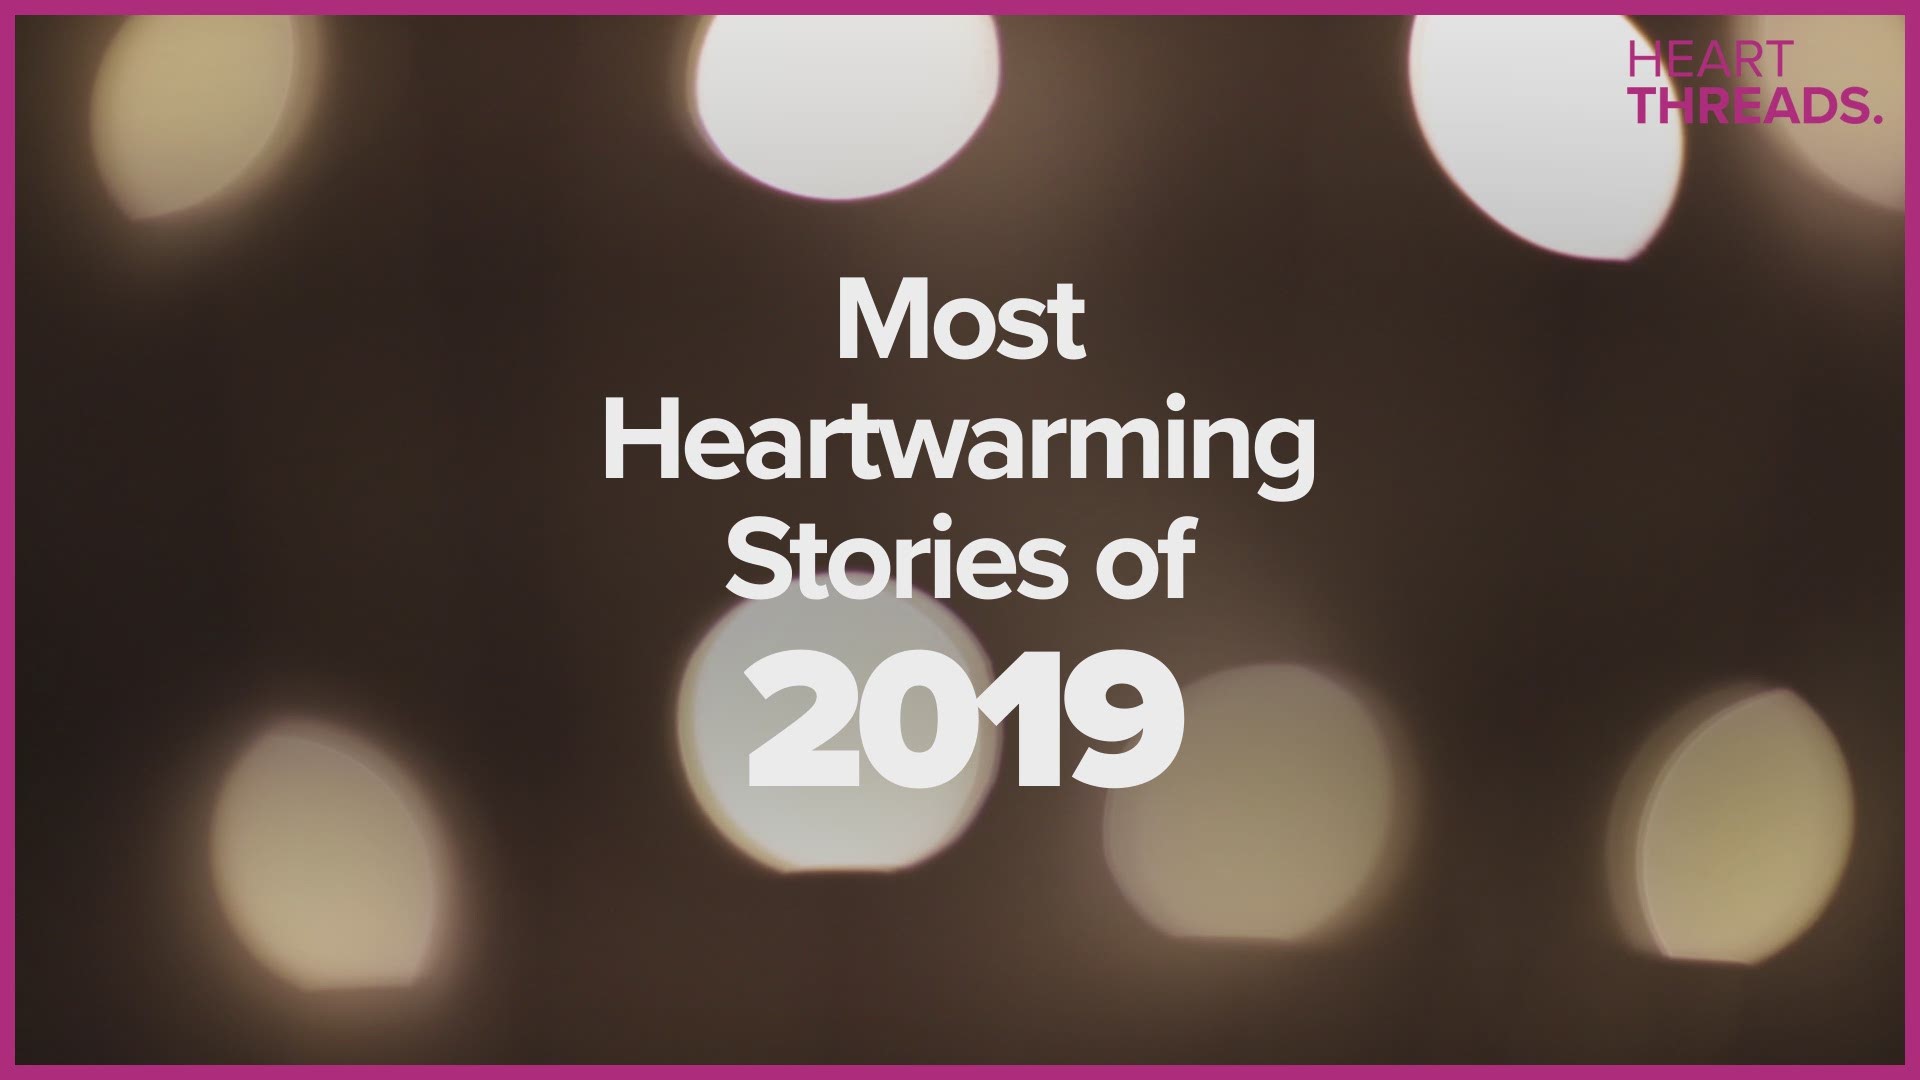 These are some of HeartThreads' most heartwarming stories from the past year.